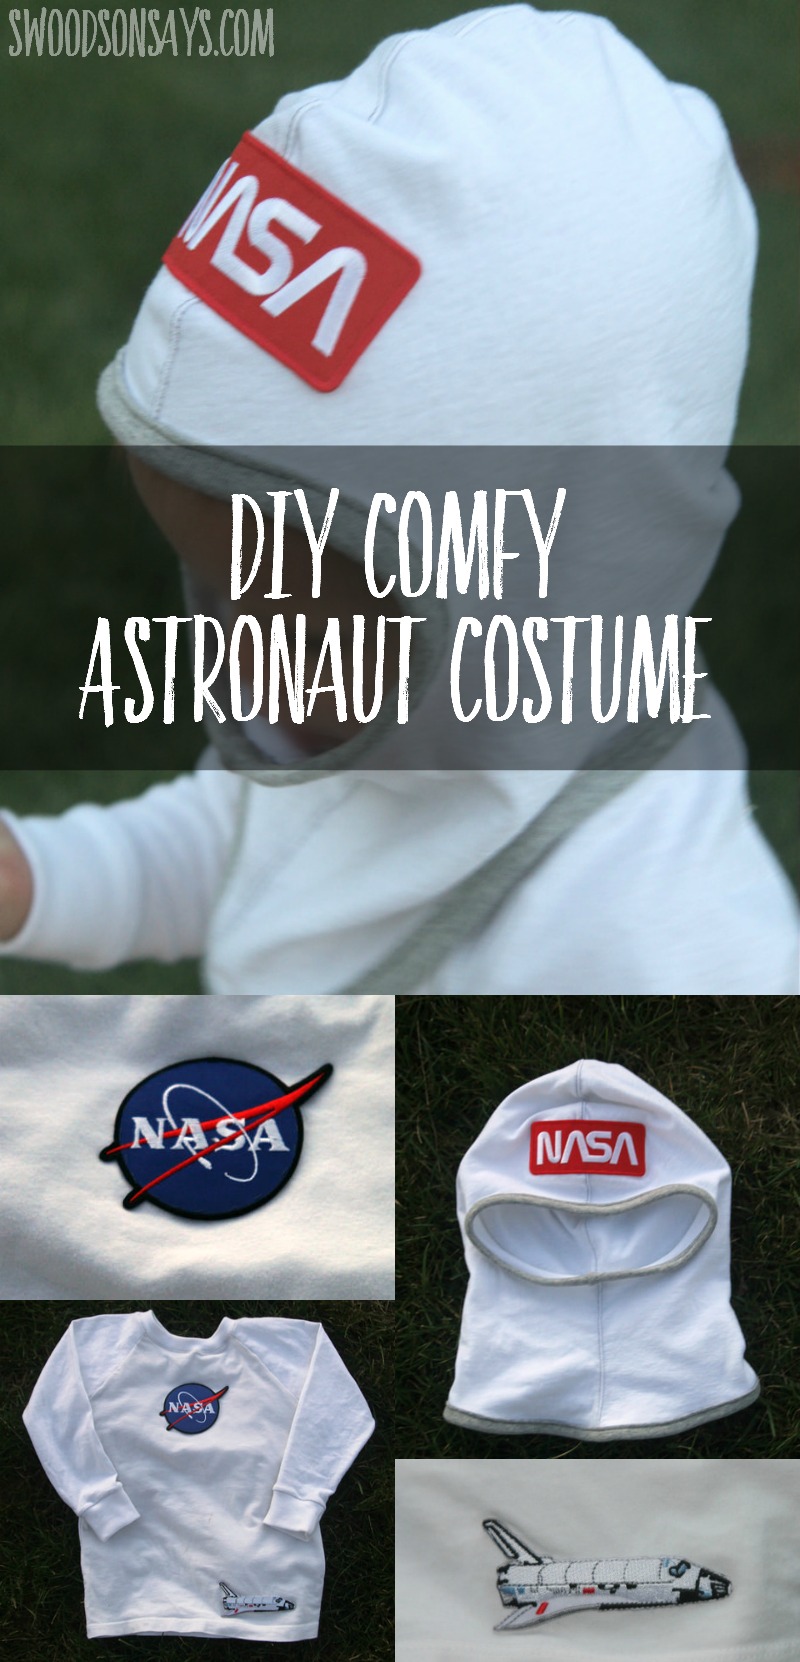 An easy DIY astronaut costume with instructions on how to sew a hood and add a few patches!